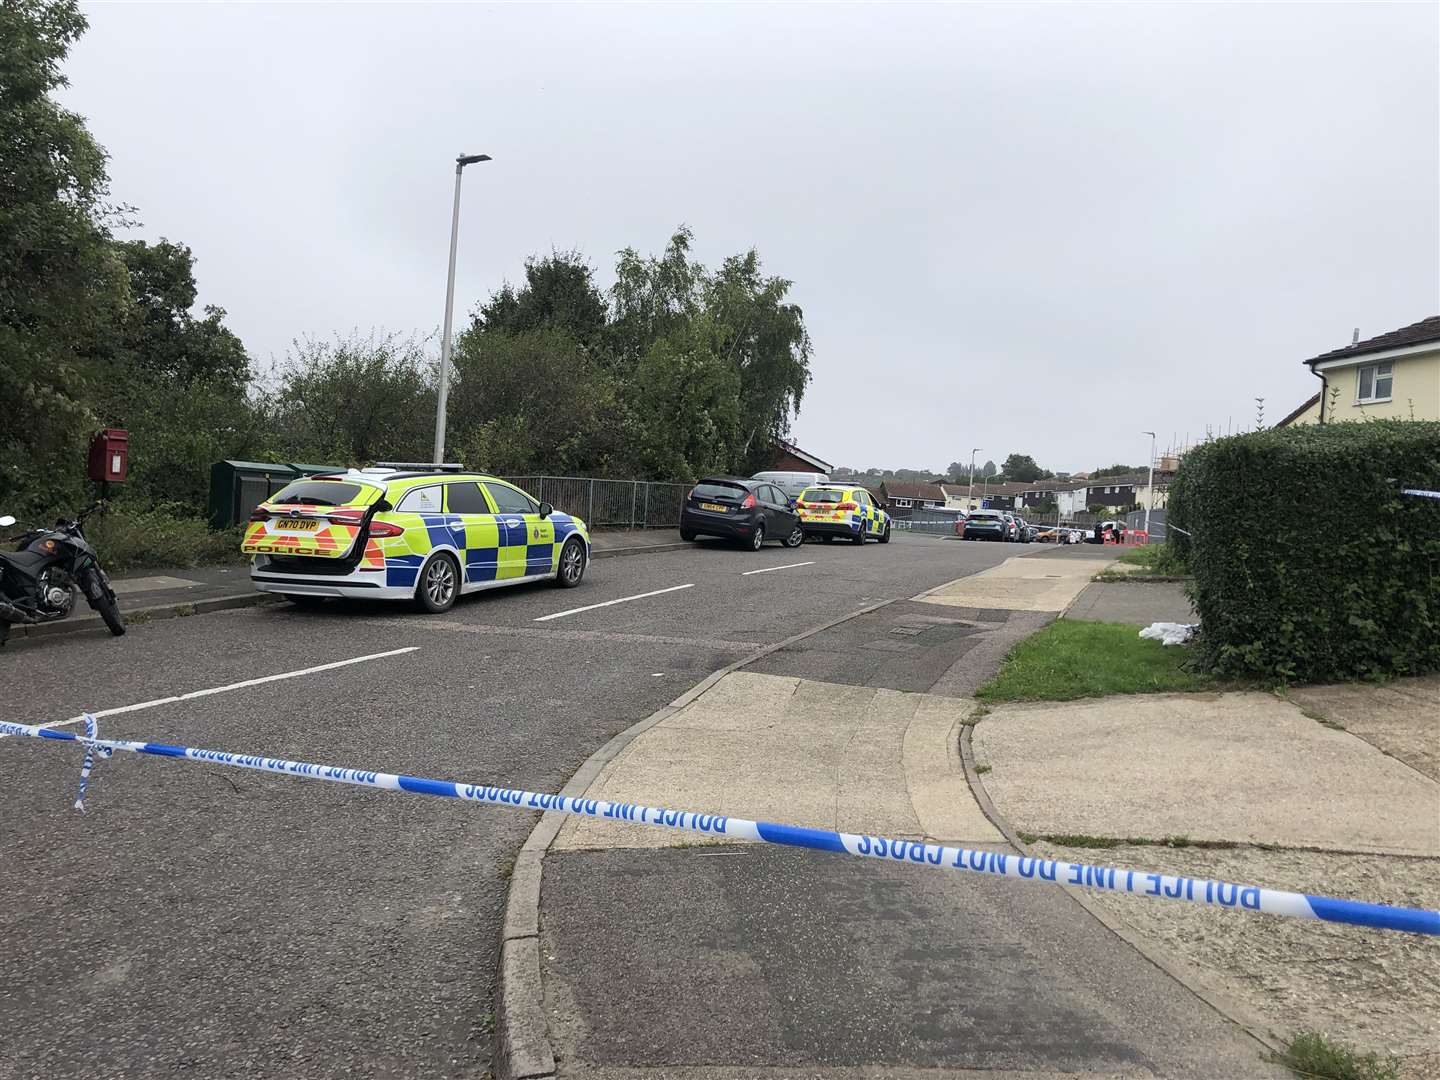 Police cordoned off a large area around Wiltshire Close